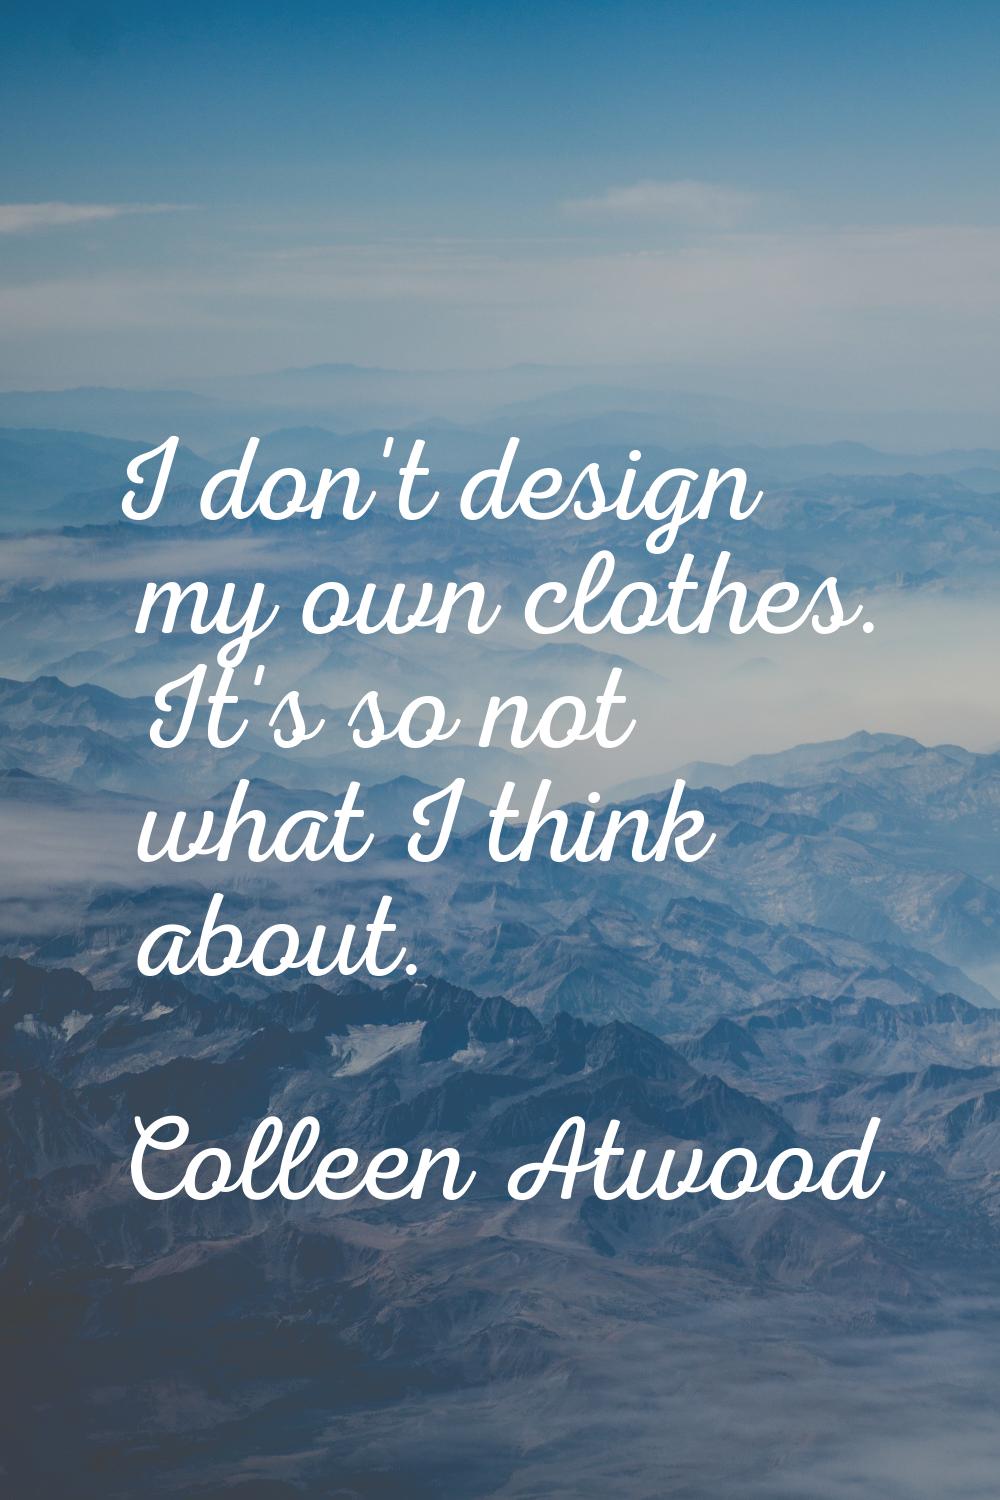 I don't design my own clothes. It's so not what I think about.